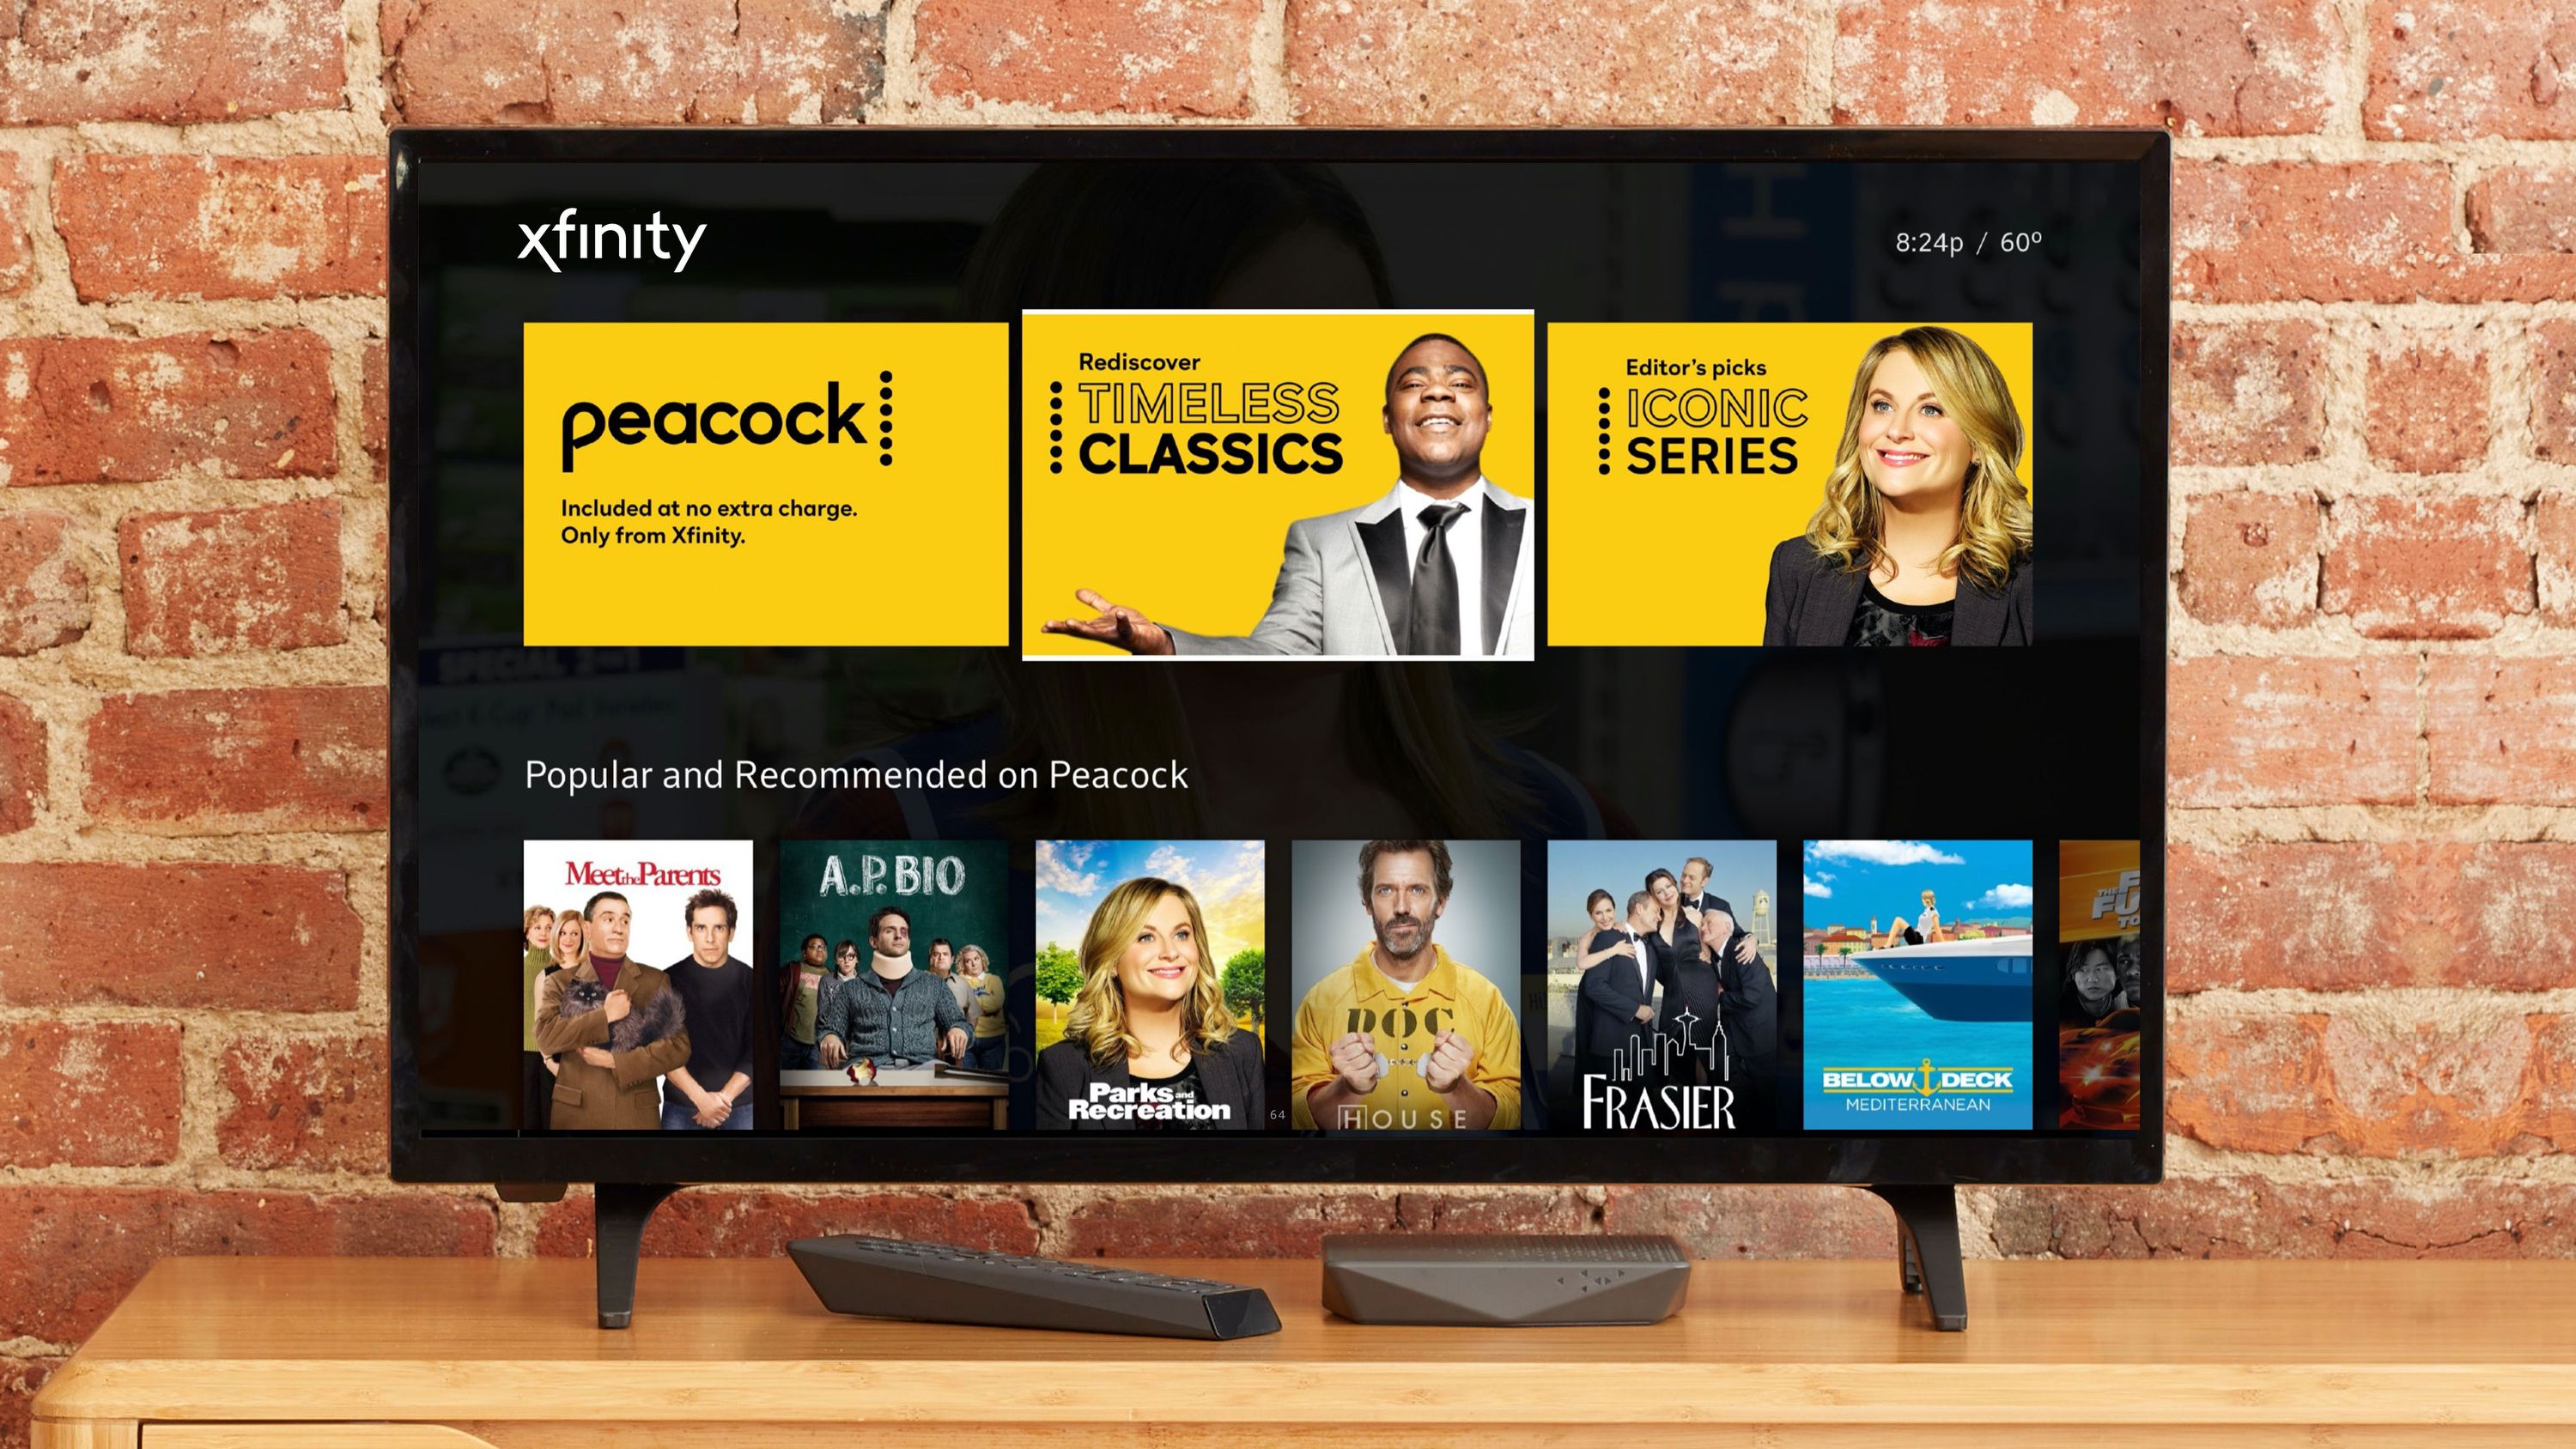 Get Peacock Premium at a Discount With DIRECTV